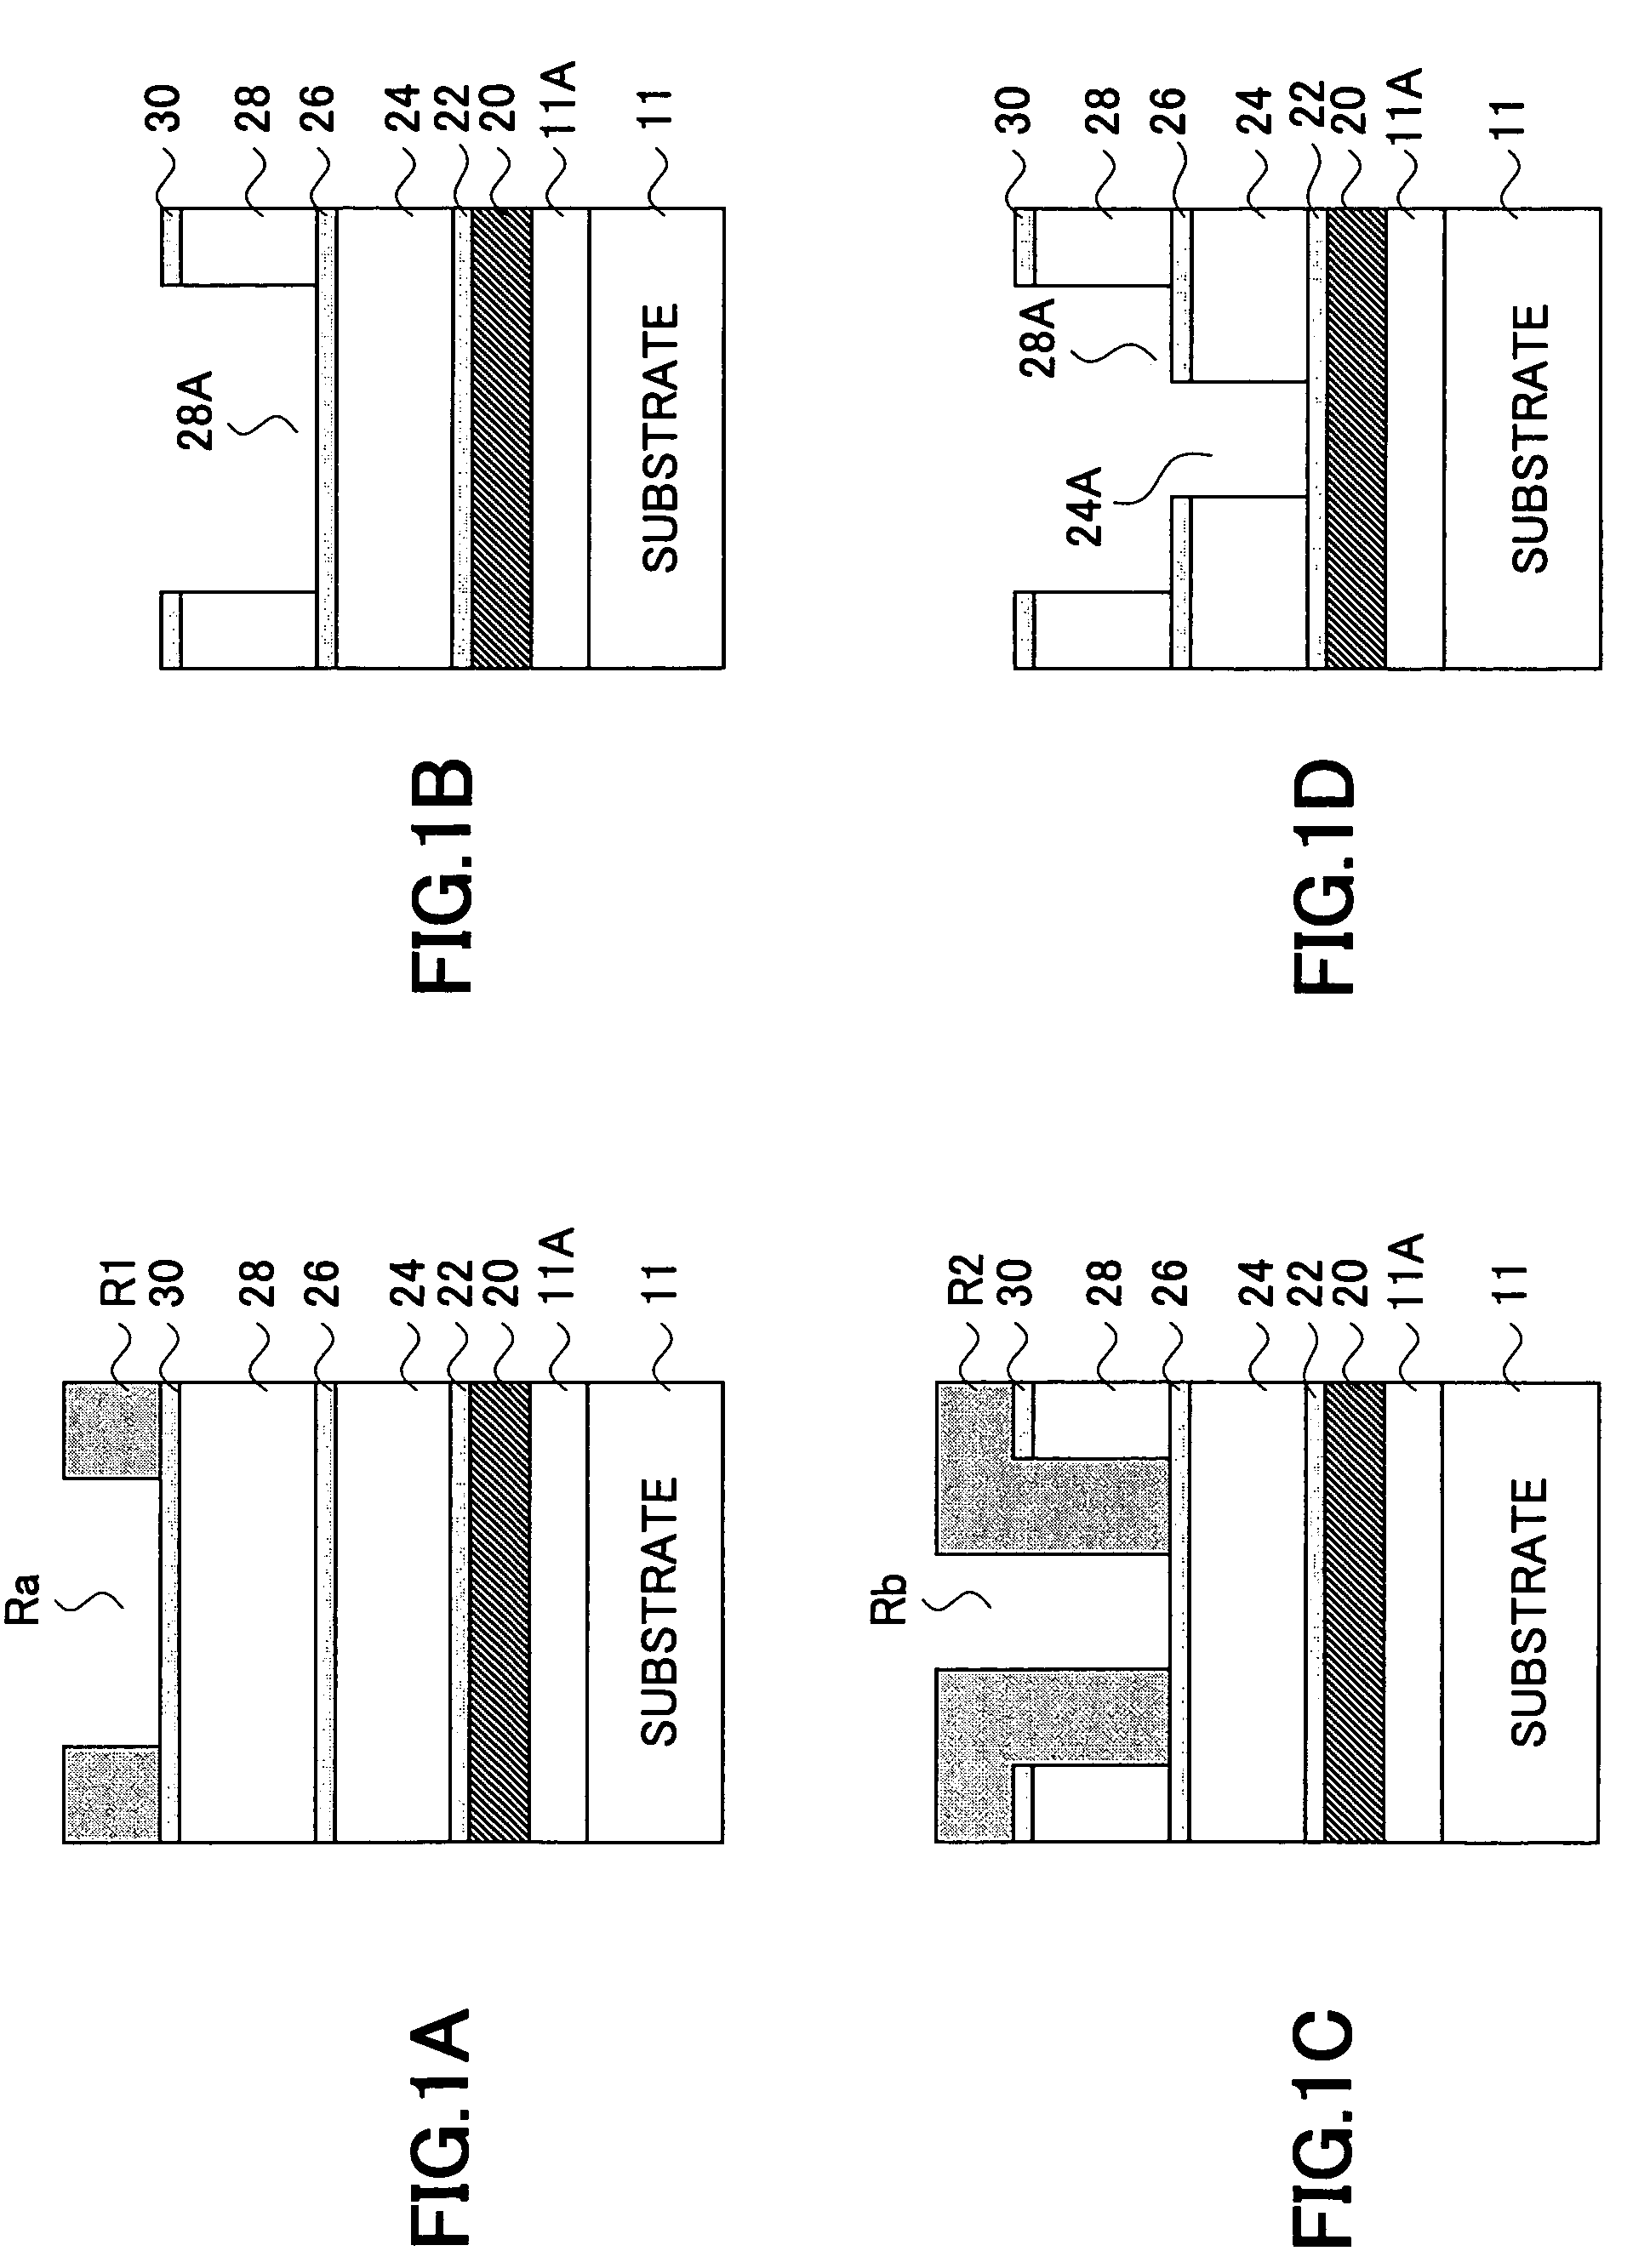 Semiconductor device having a multilayer interconnection structure and fabrication method thereof